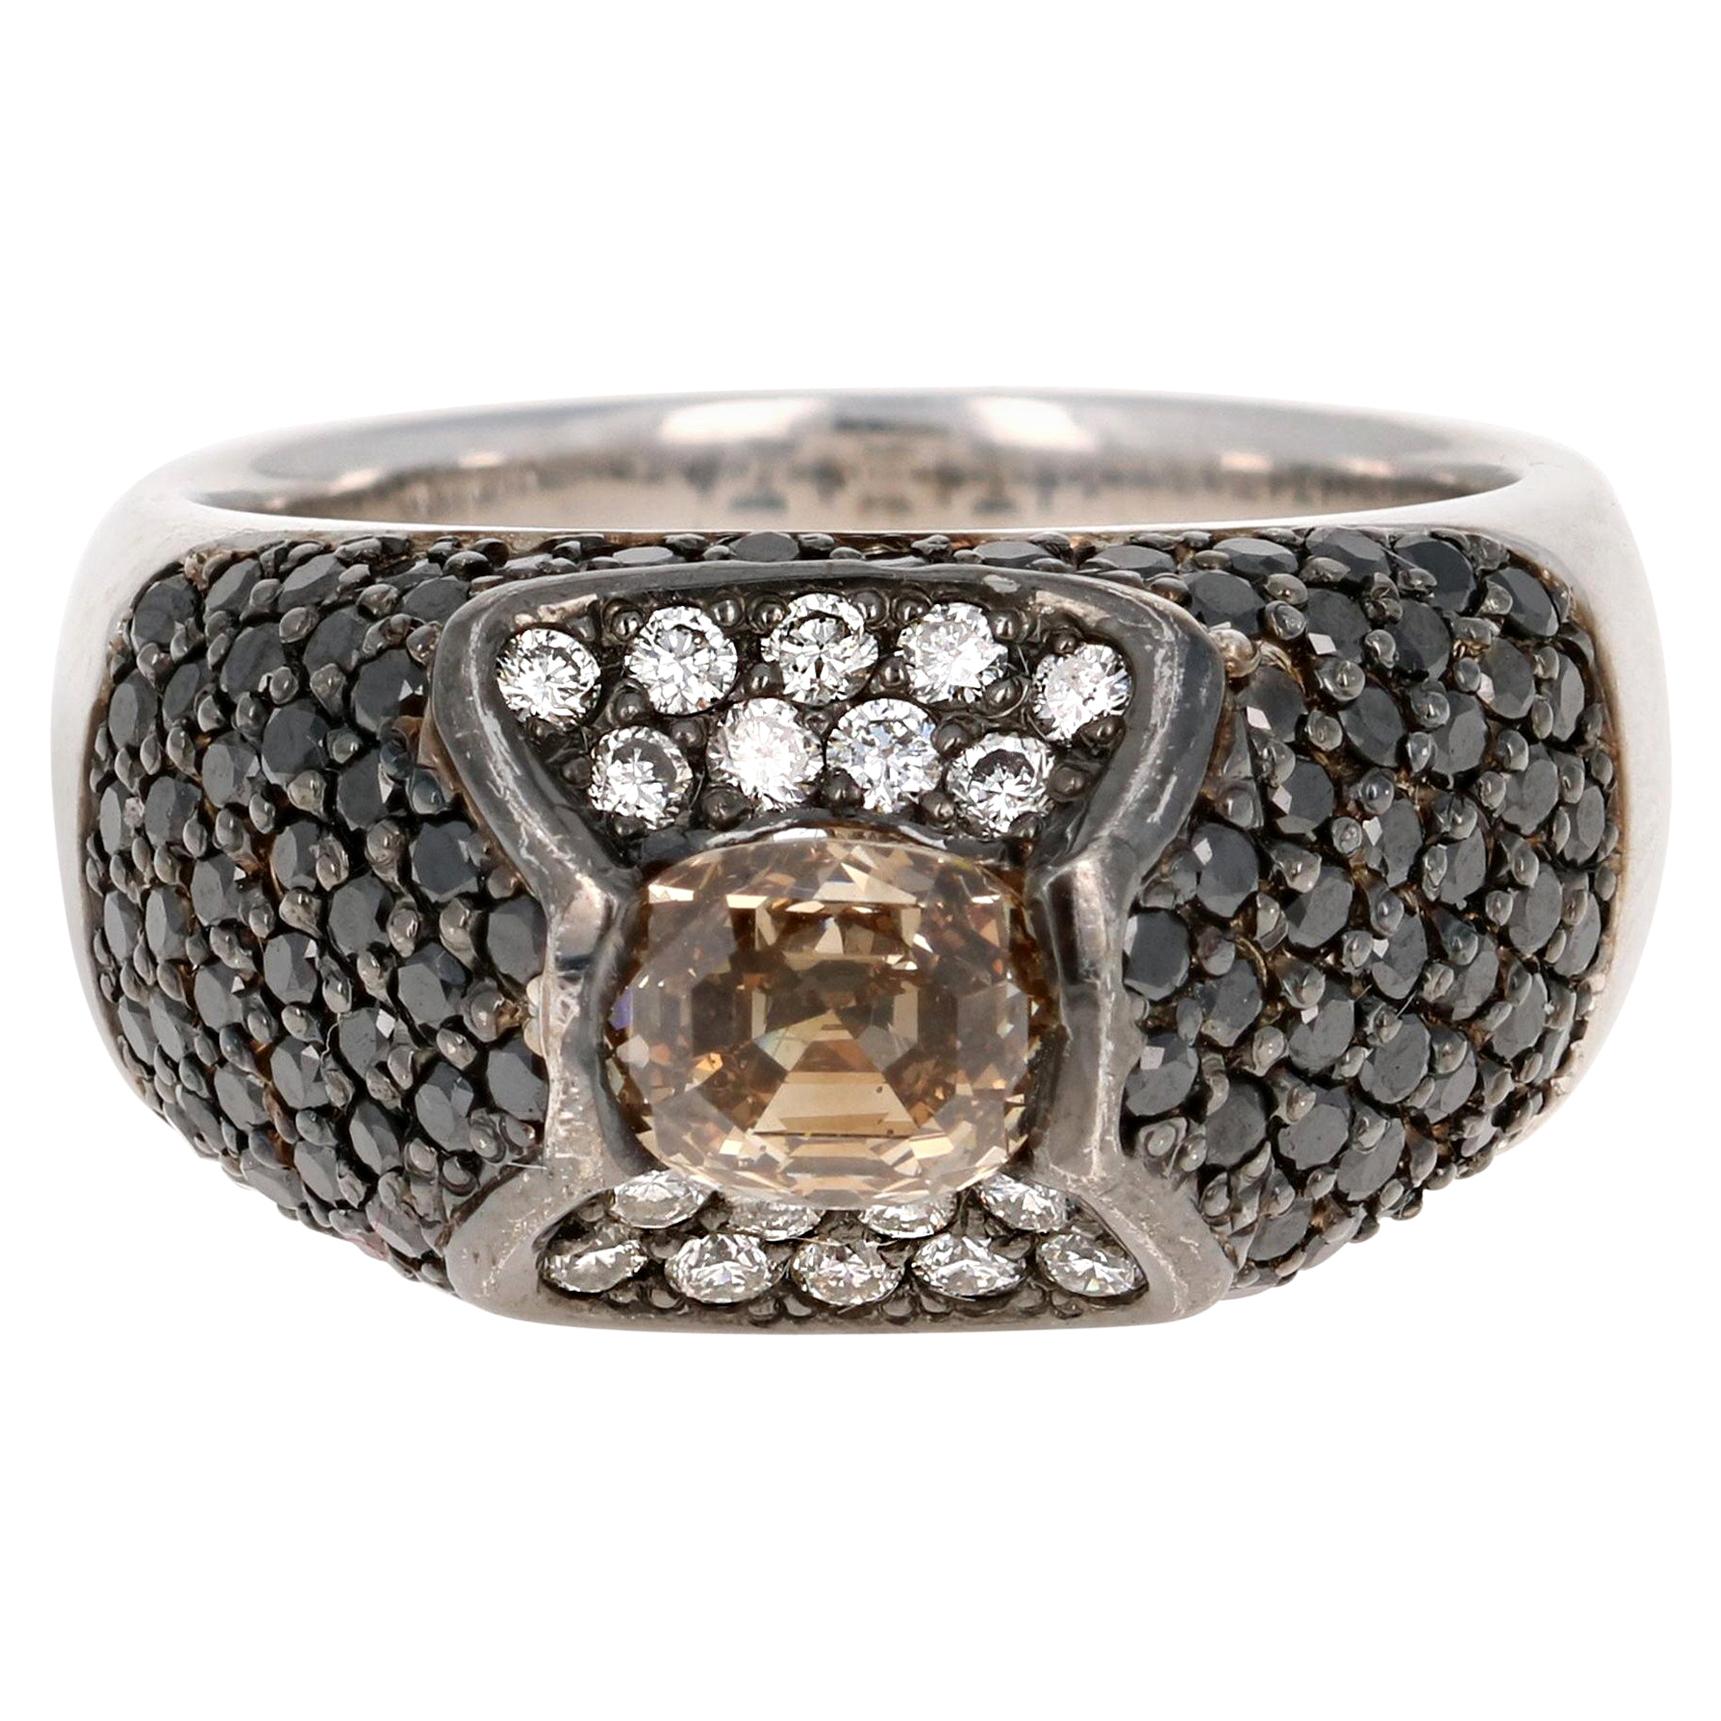 2.76 Carat Black and Fancy Colored Diamond White Gold Cocktail Ring